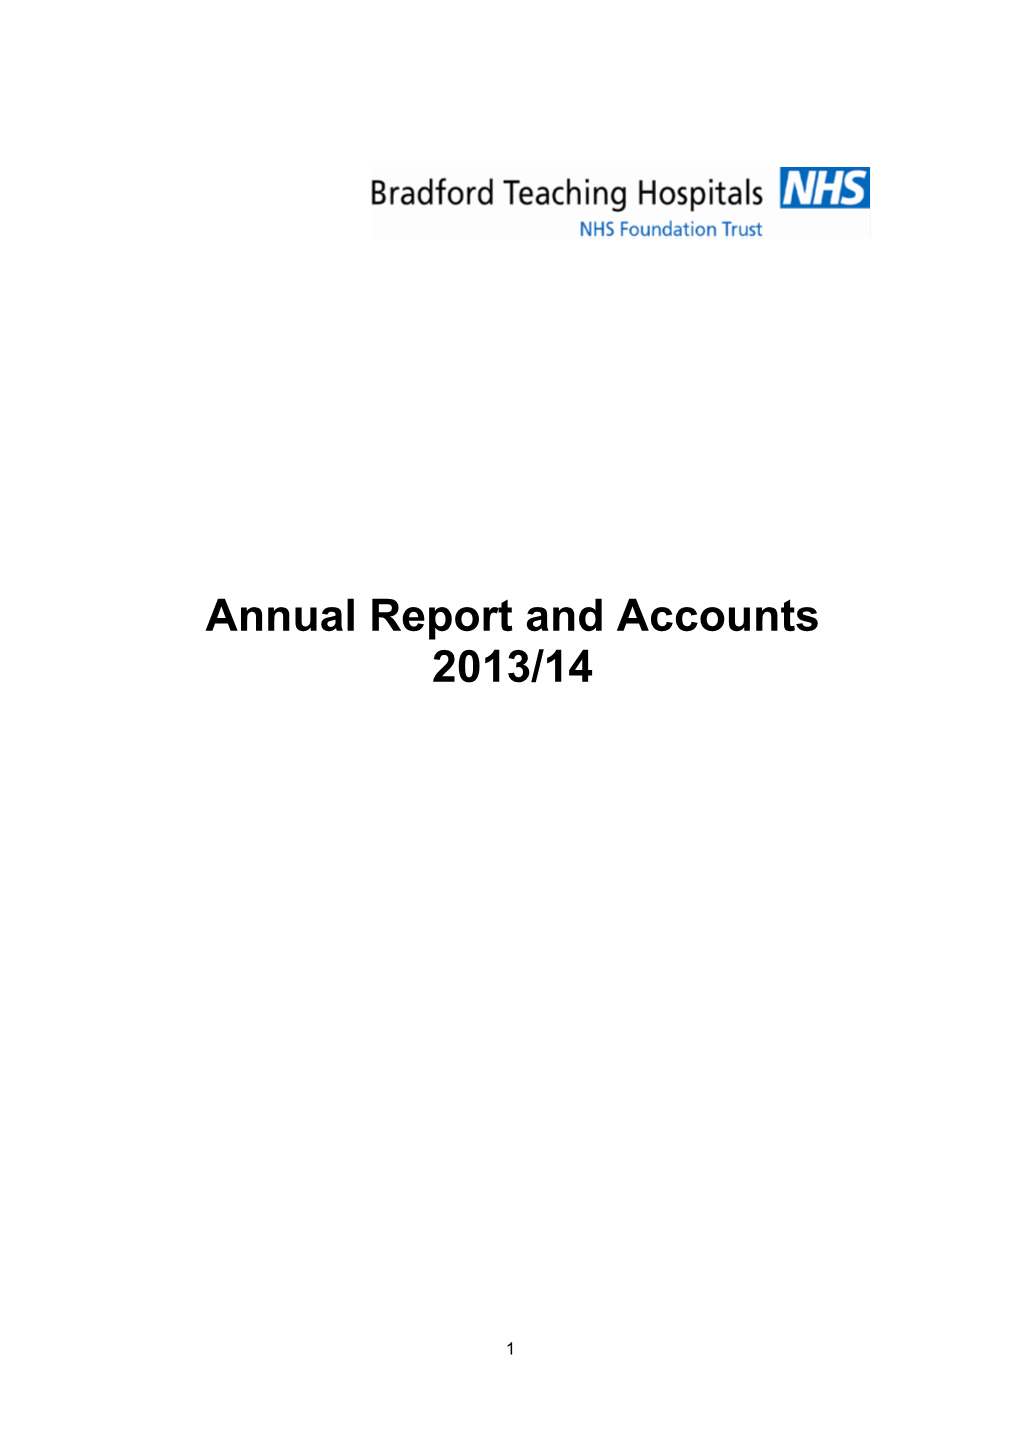 Annual Report and Accounts 2013-14